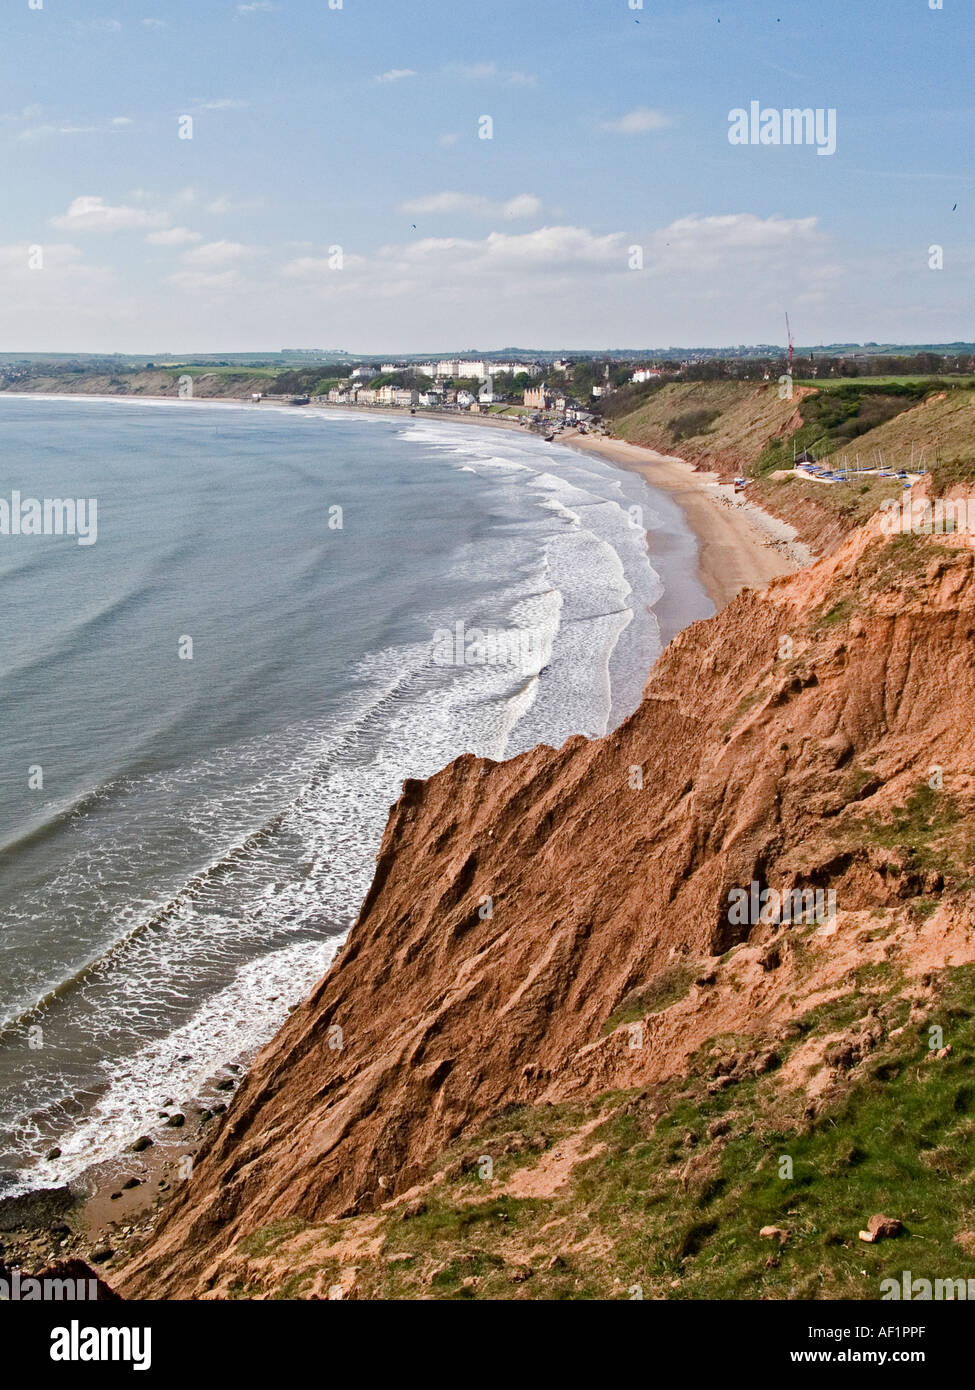 Eroded cliffs at Filey, North Yorkshire, UK, looking from the Filey Brigg headland towards the town. Stock Photo